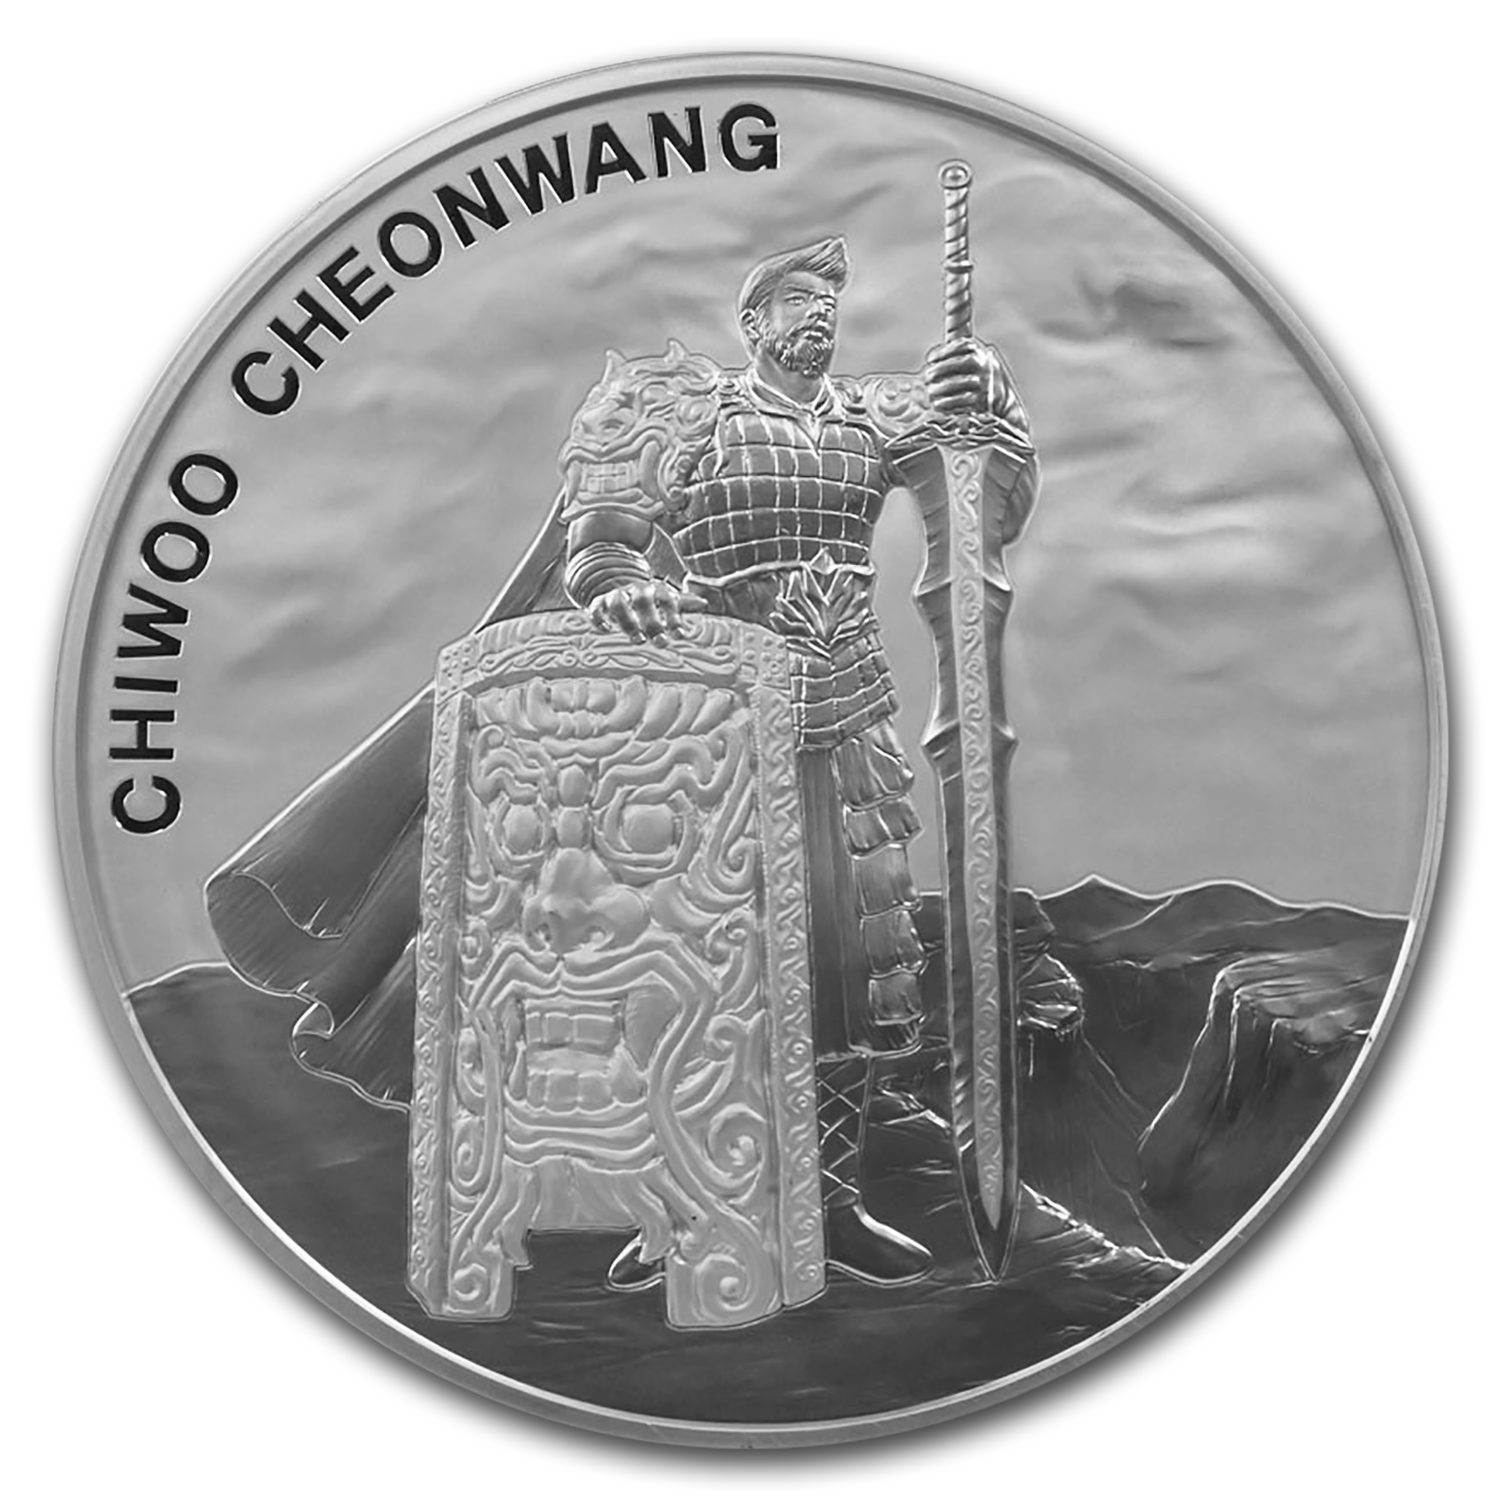 Chiwoo Cheonwang South Korean Silver Medals & Coins | APMEX